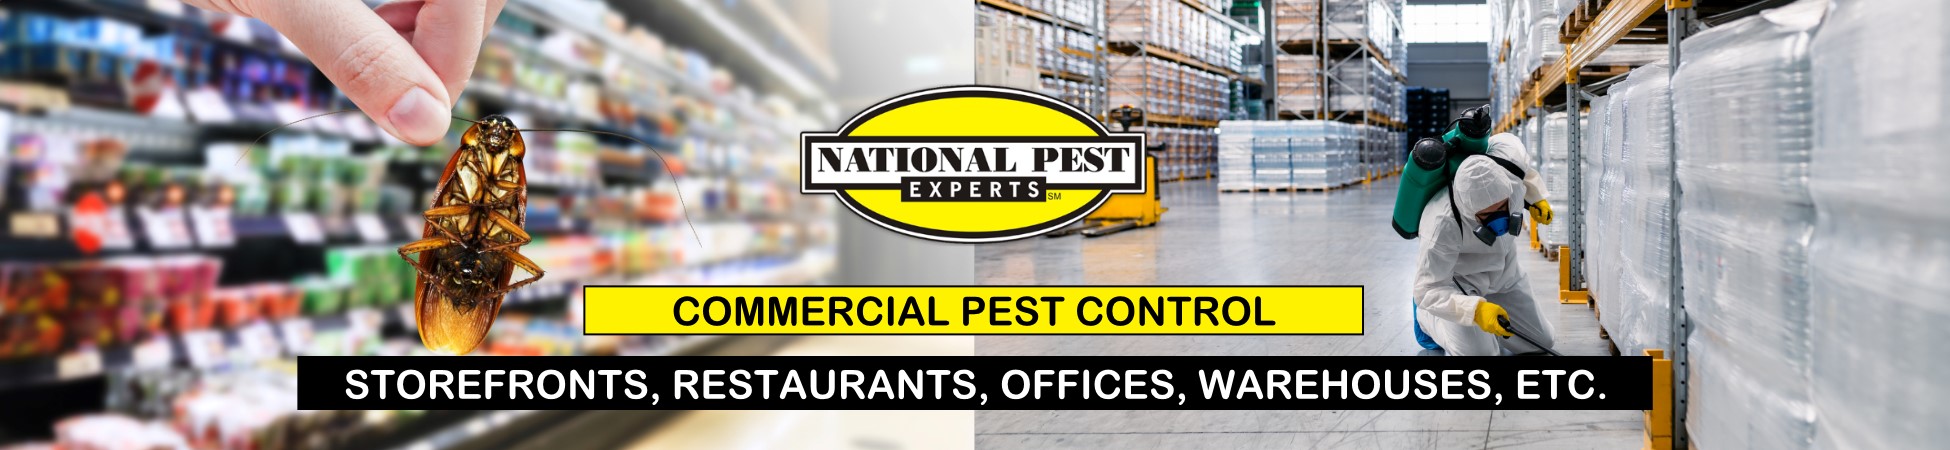 National Pest Experts - Commercial & Industrial exterminating and pest control in Fort Salonga, NY